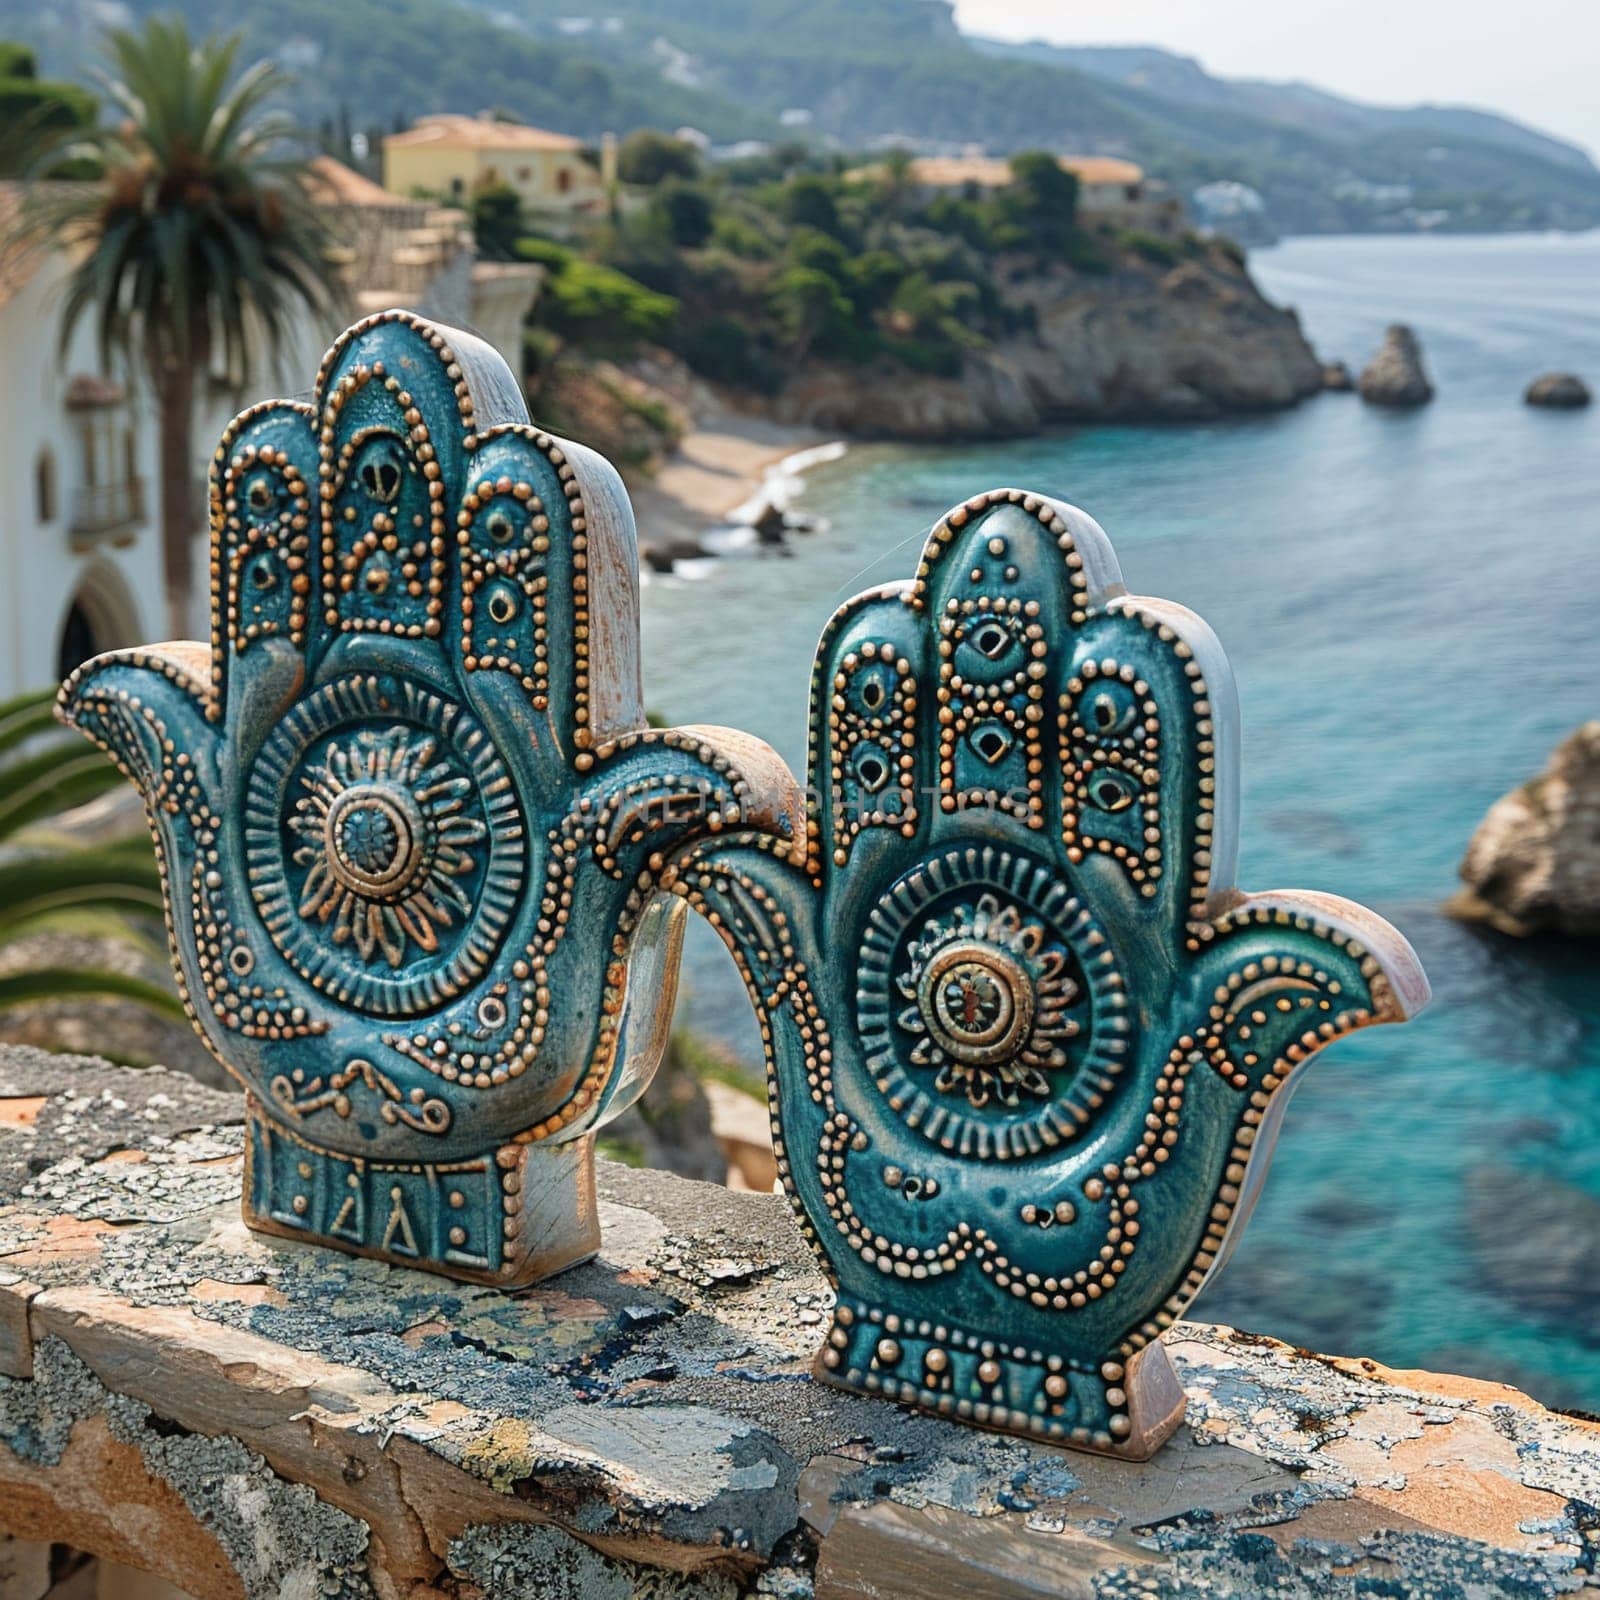 Hamsa Hand Amulets Overlooking a Mediterranean Seascape The protective symbols blur with the sea by Benzoix